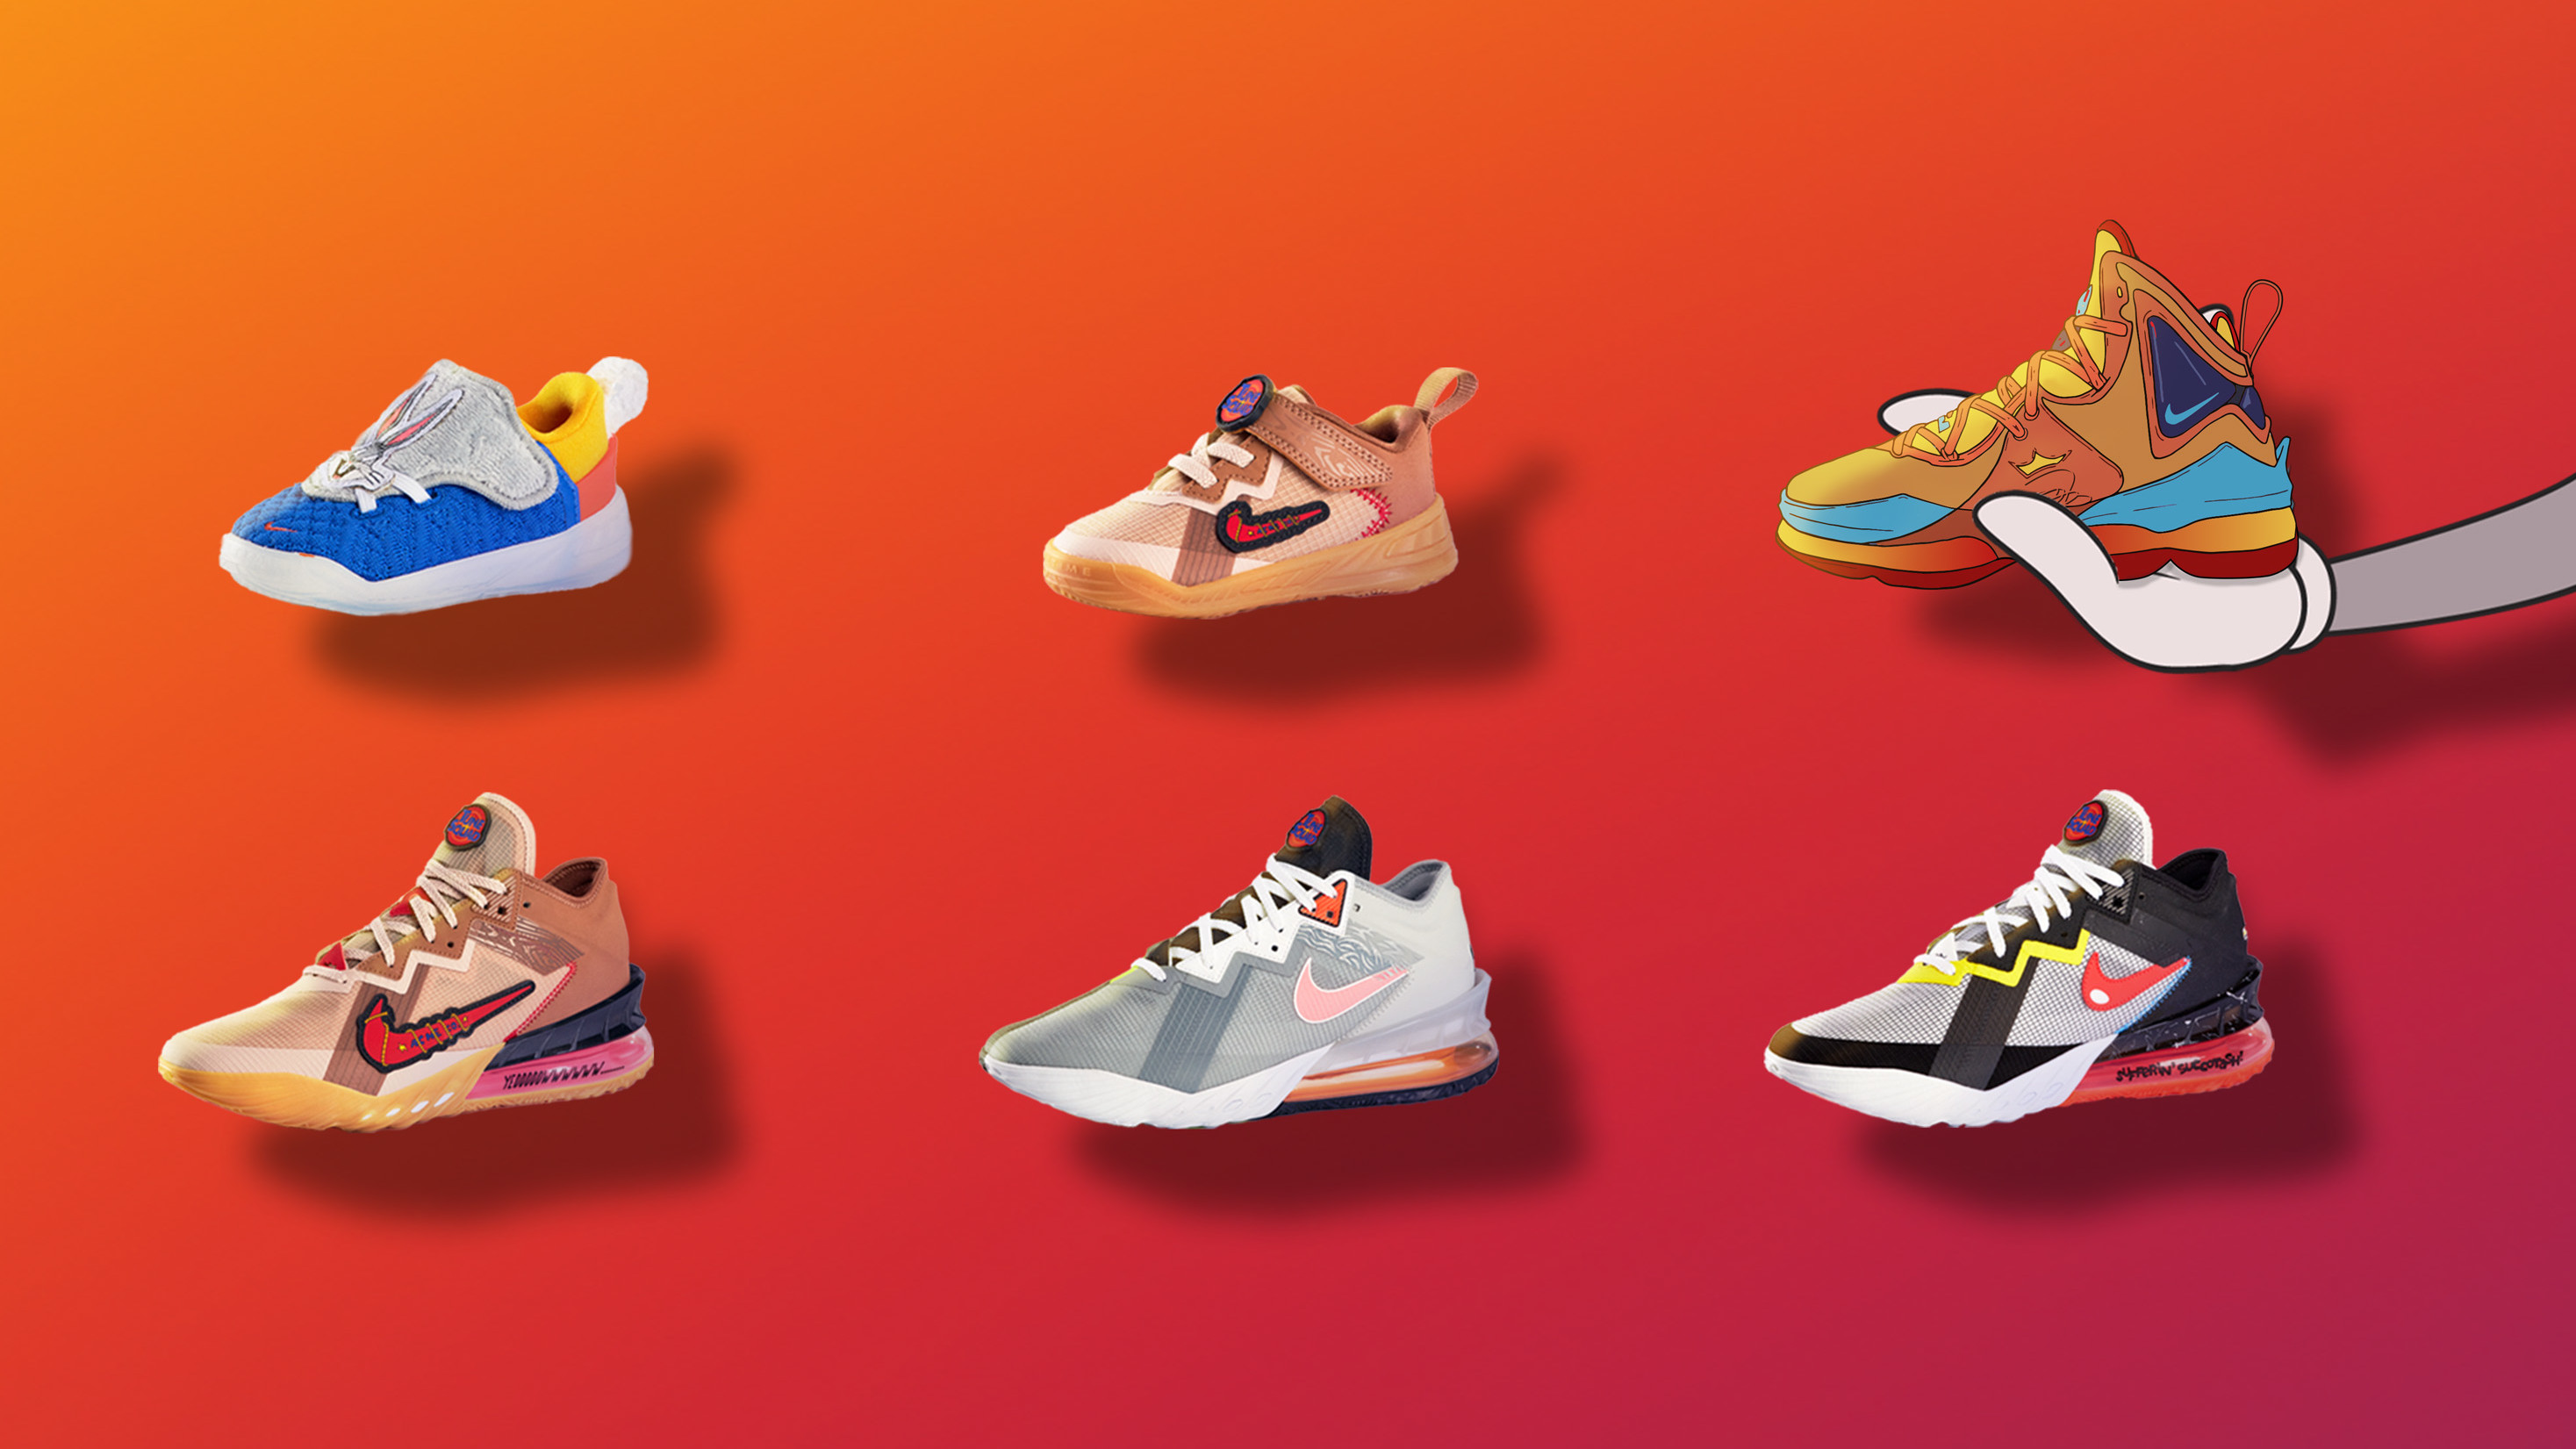 The Best of 2021's Valentine's Day Sneaker Releases